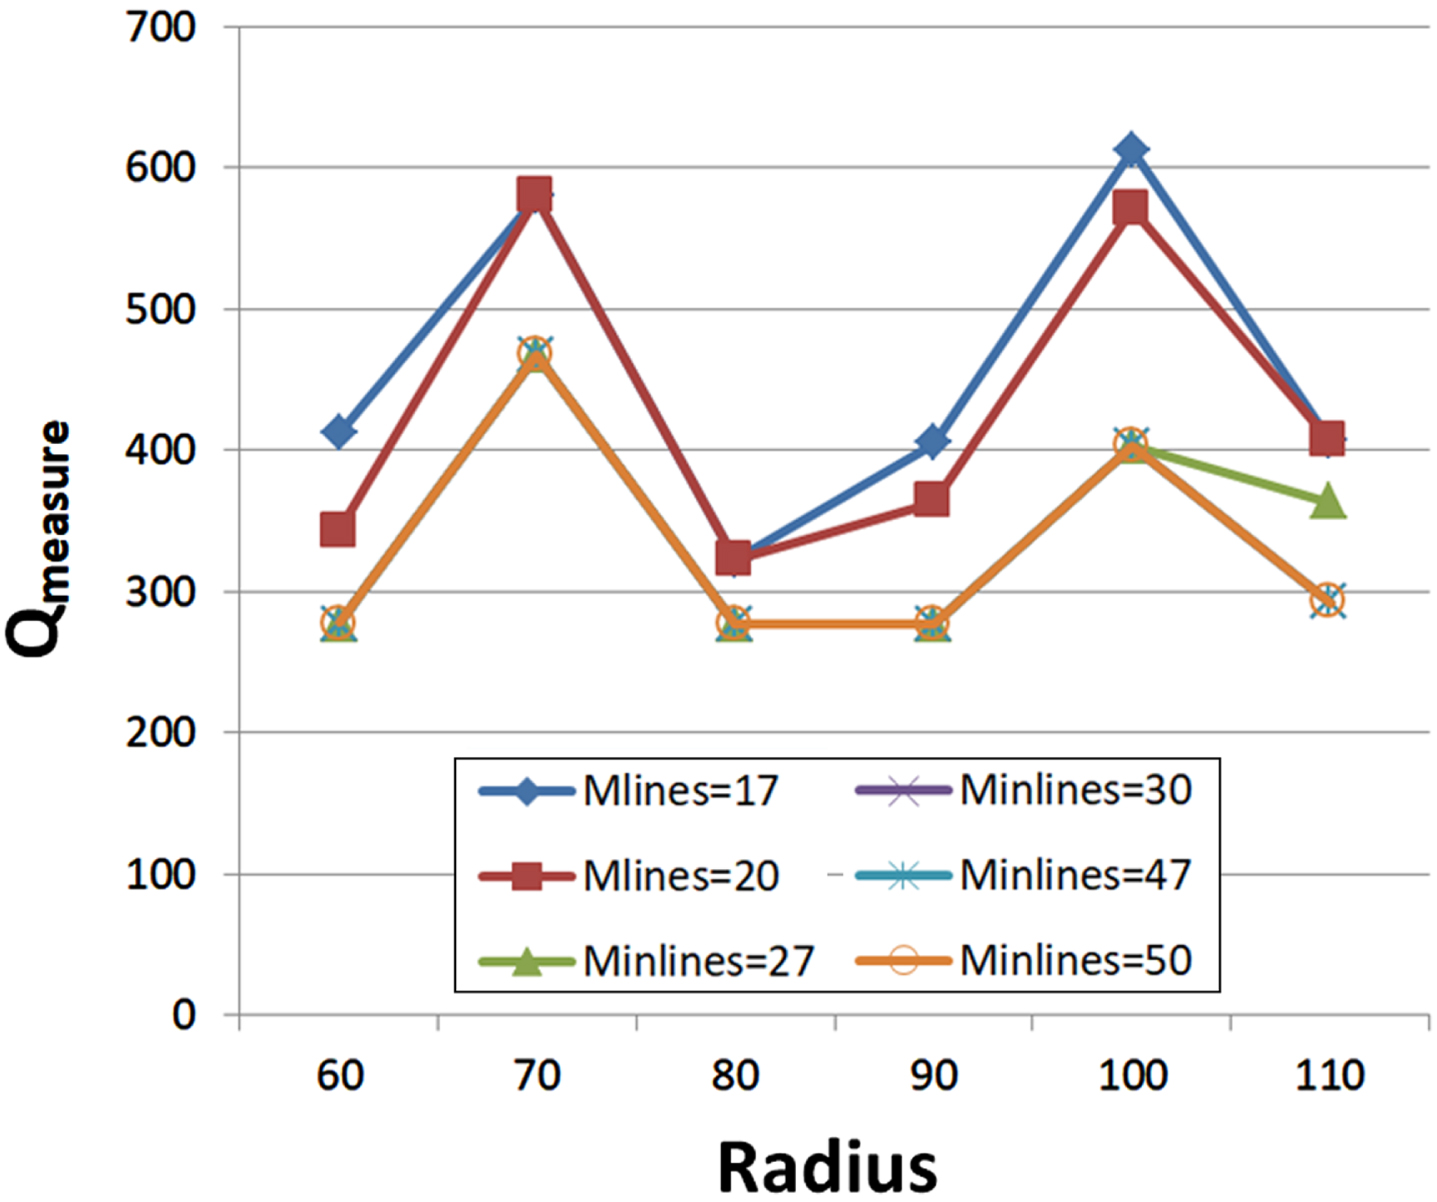 Quality measure (Qmeasure) with different values of Radius (Dr) and Minlines.